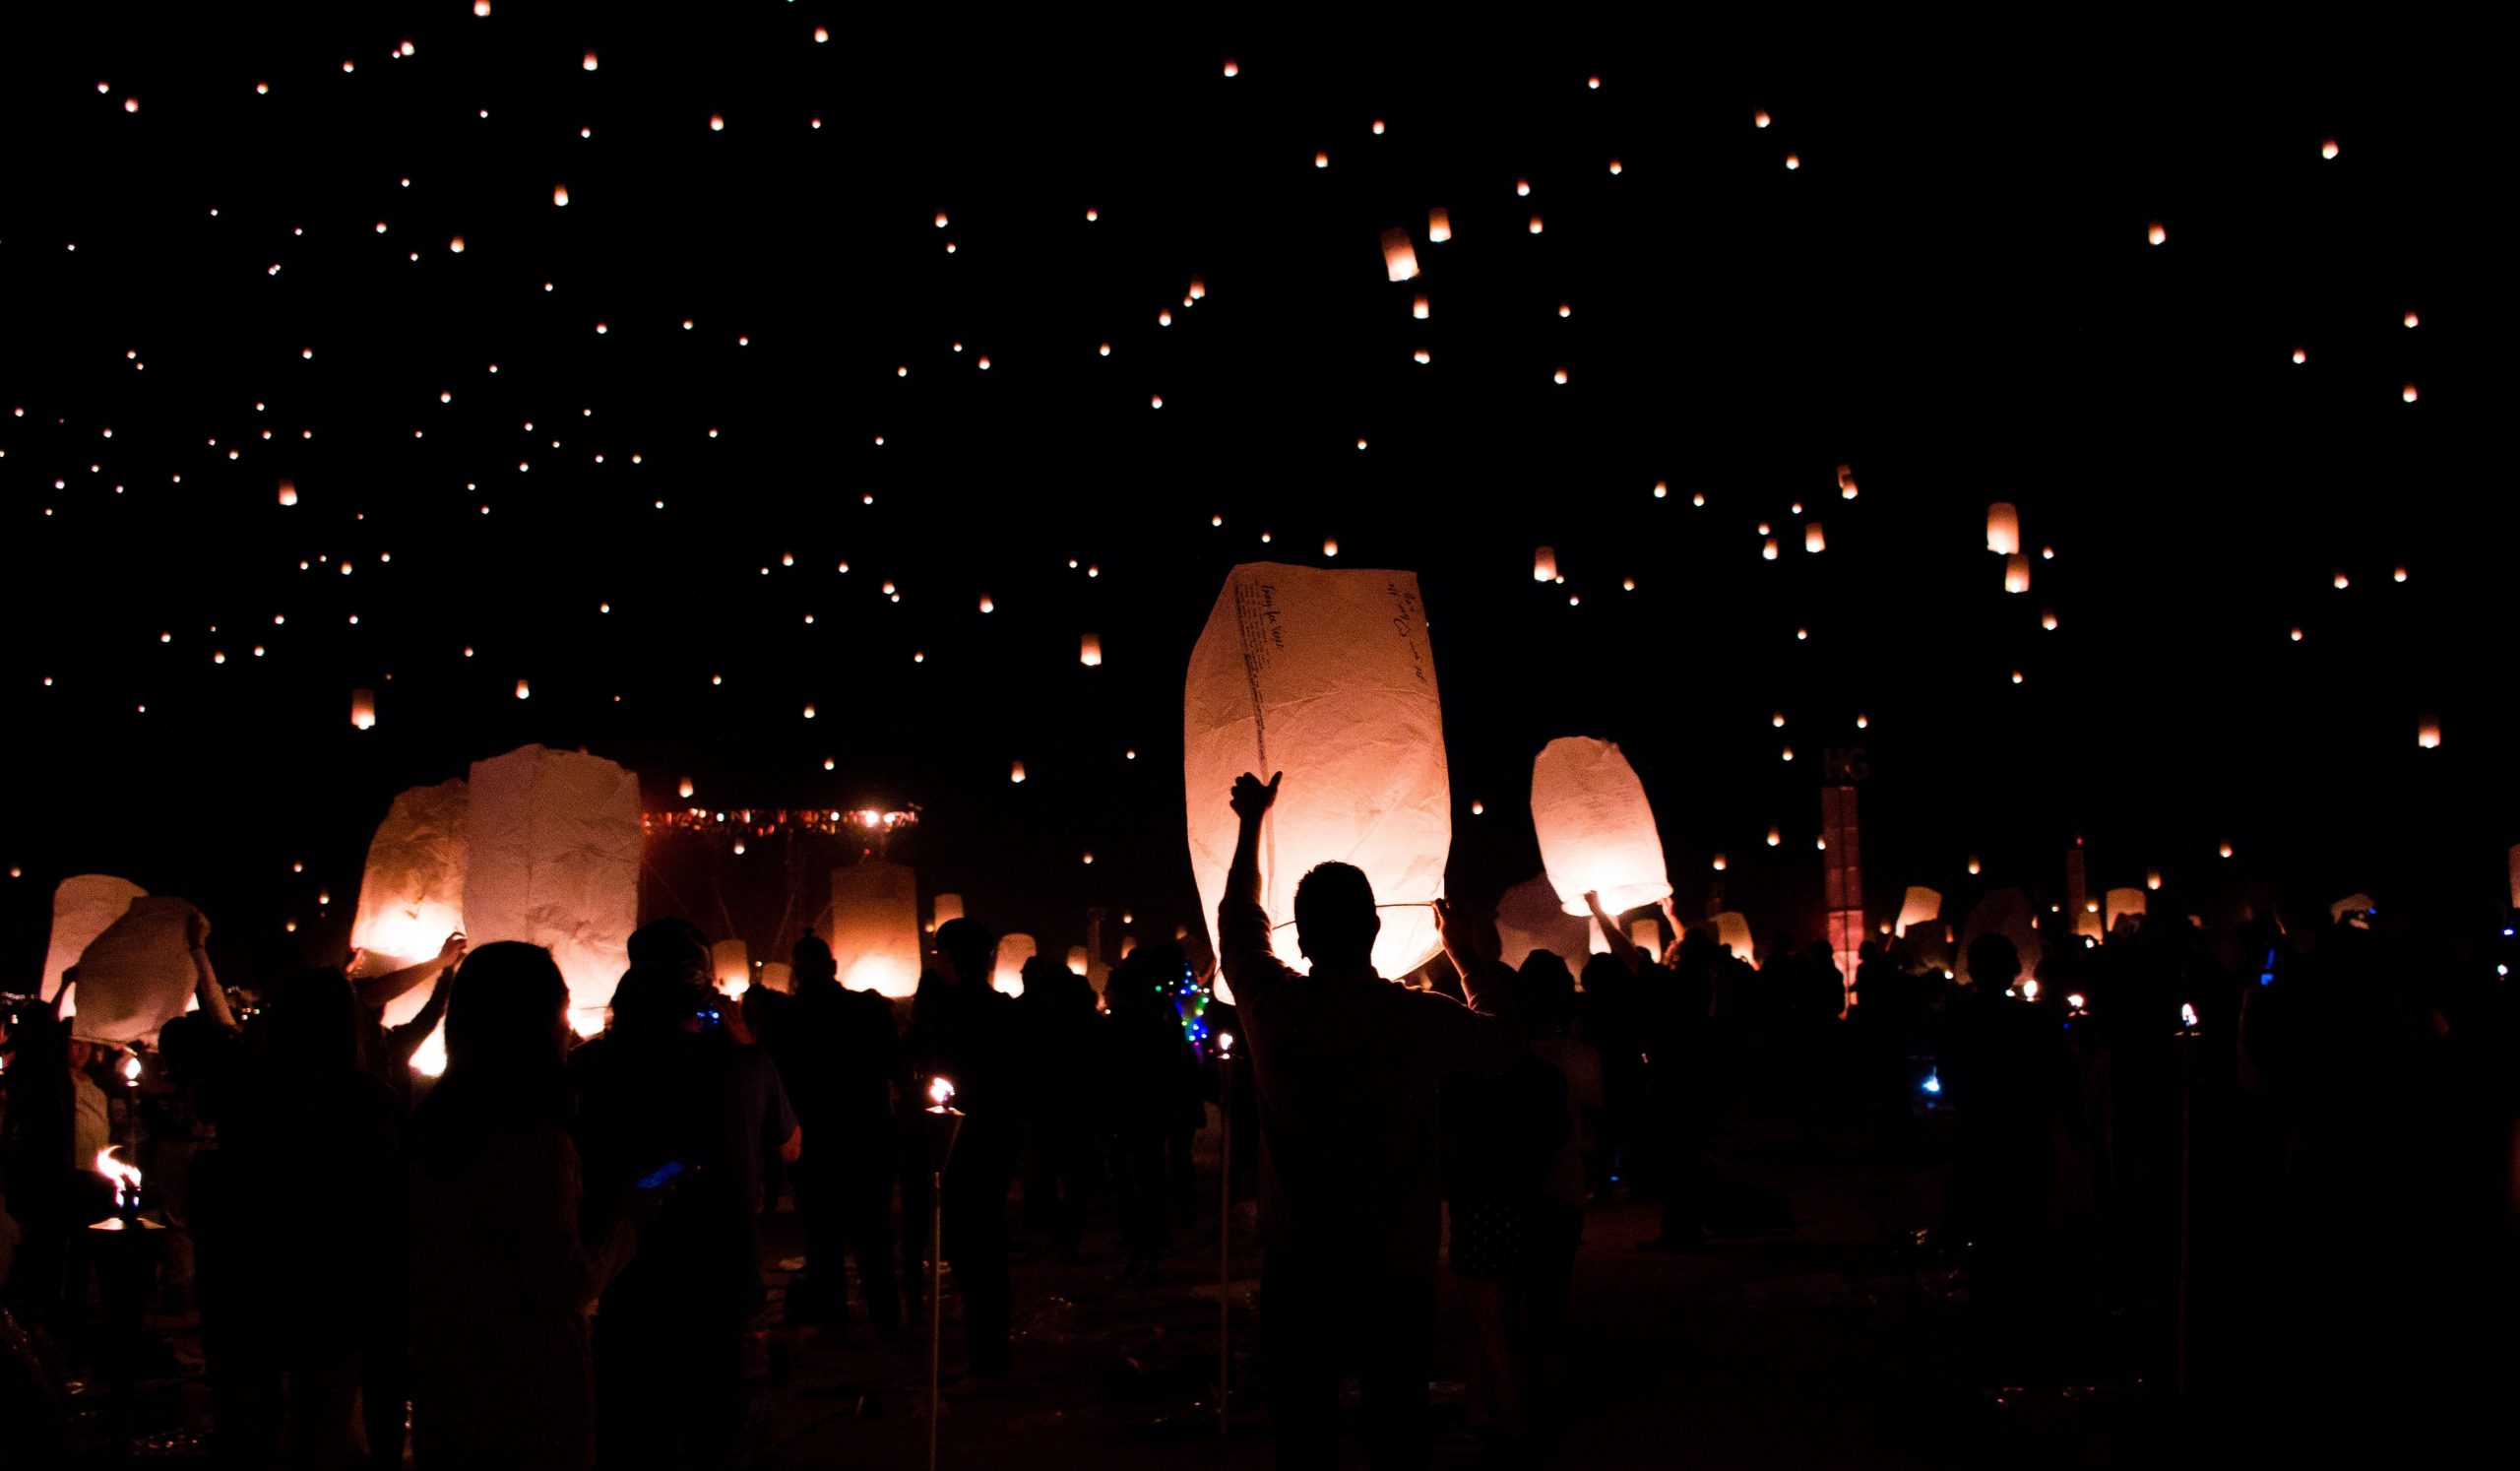 Ditching crackers for sky lanterns? The lights will guide Delhiites home